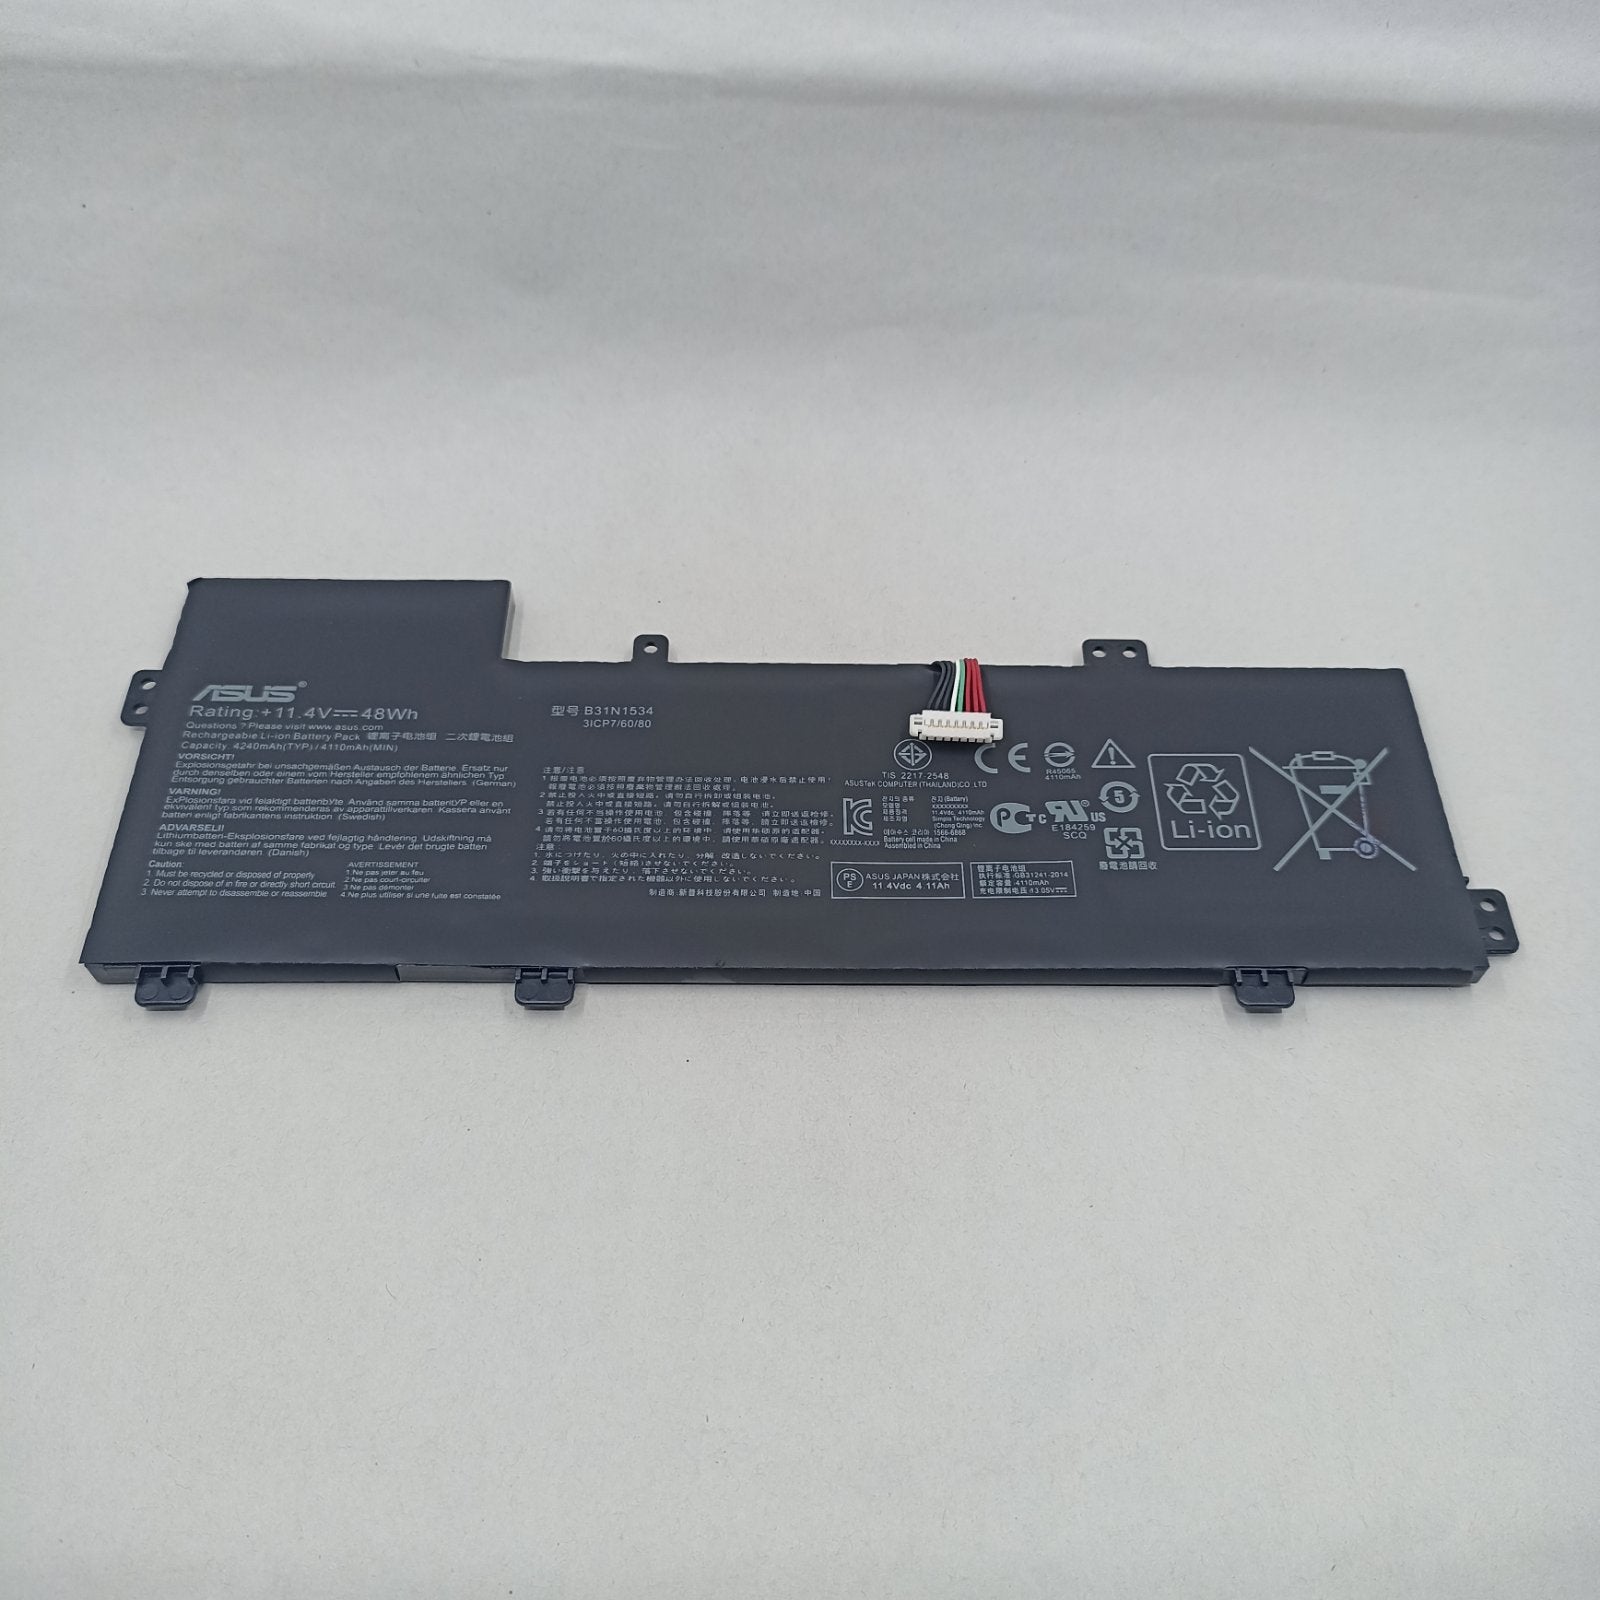 Replacement Battery for Asus UX510UX A1